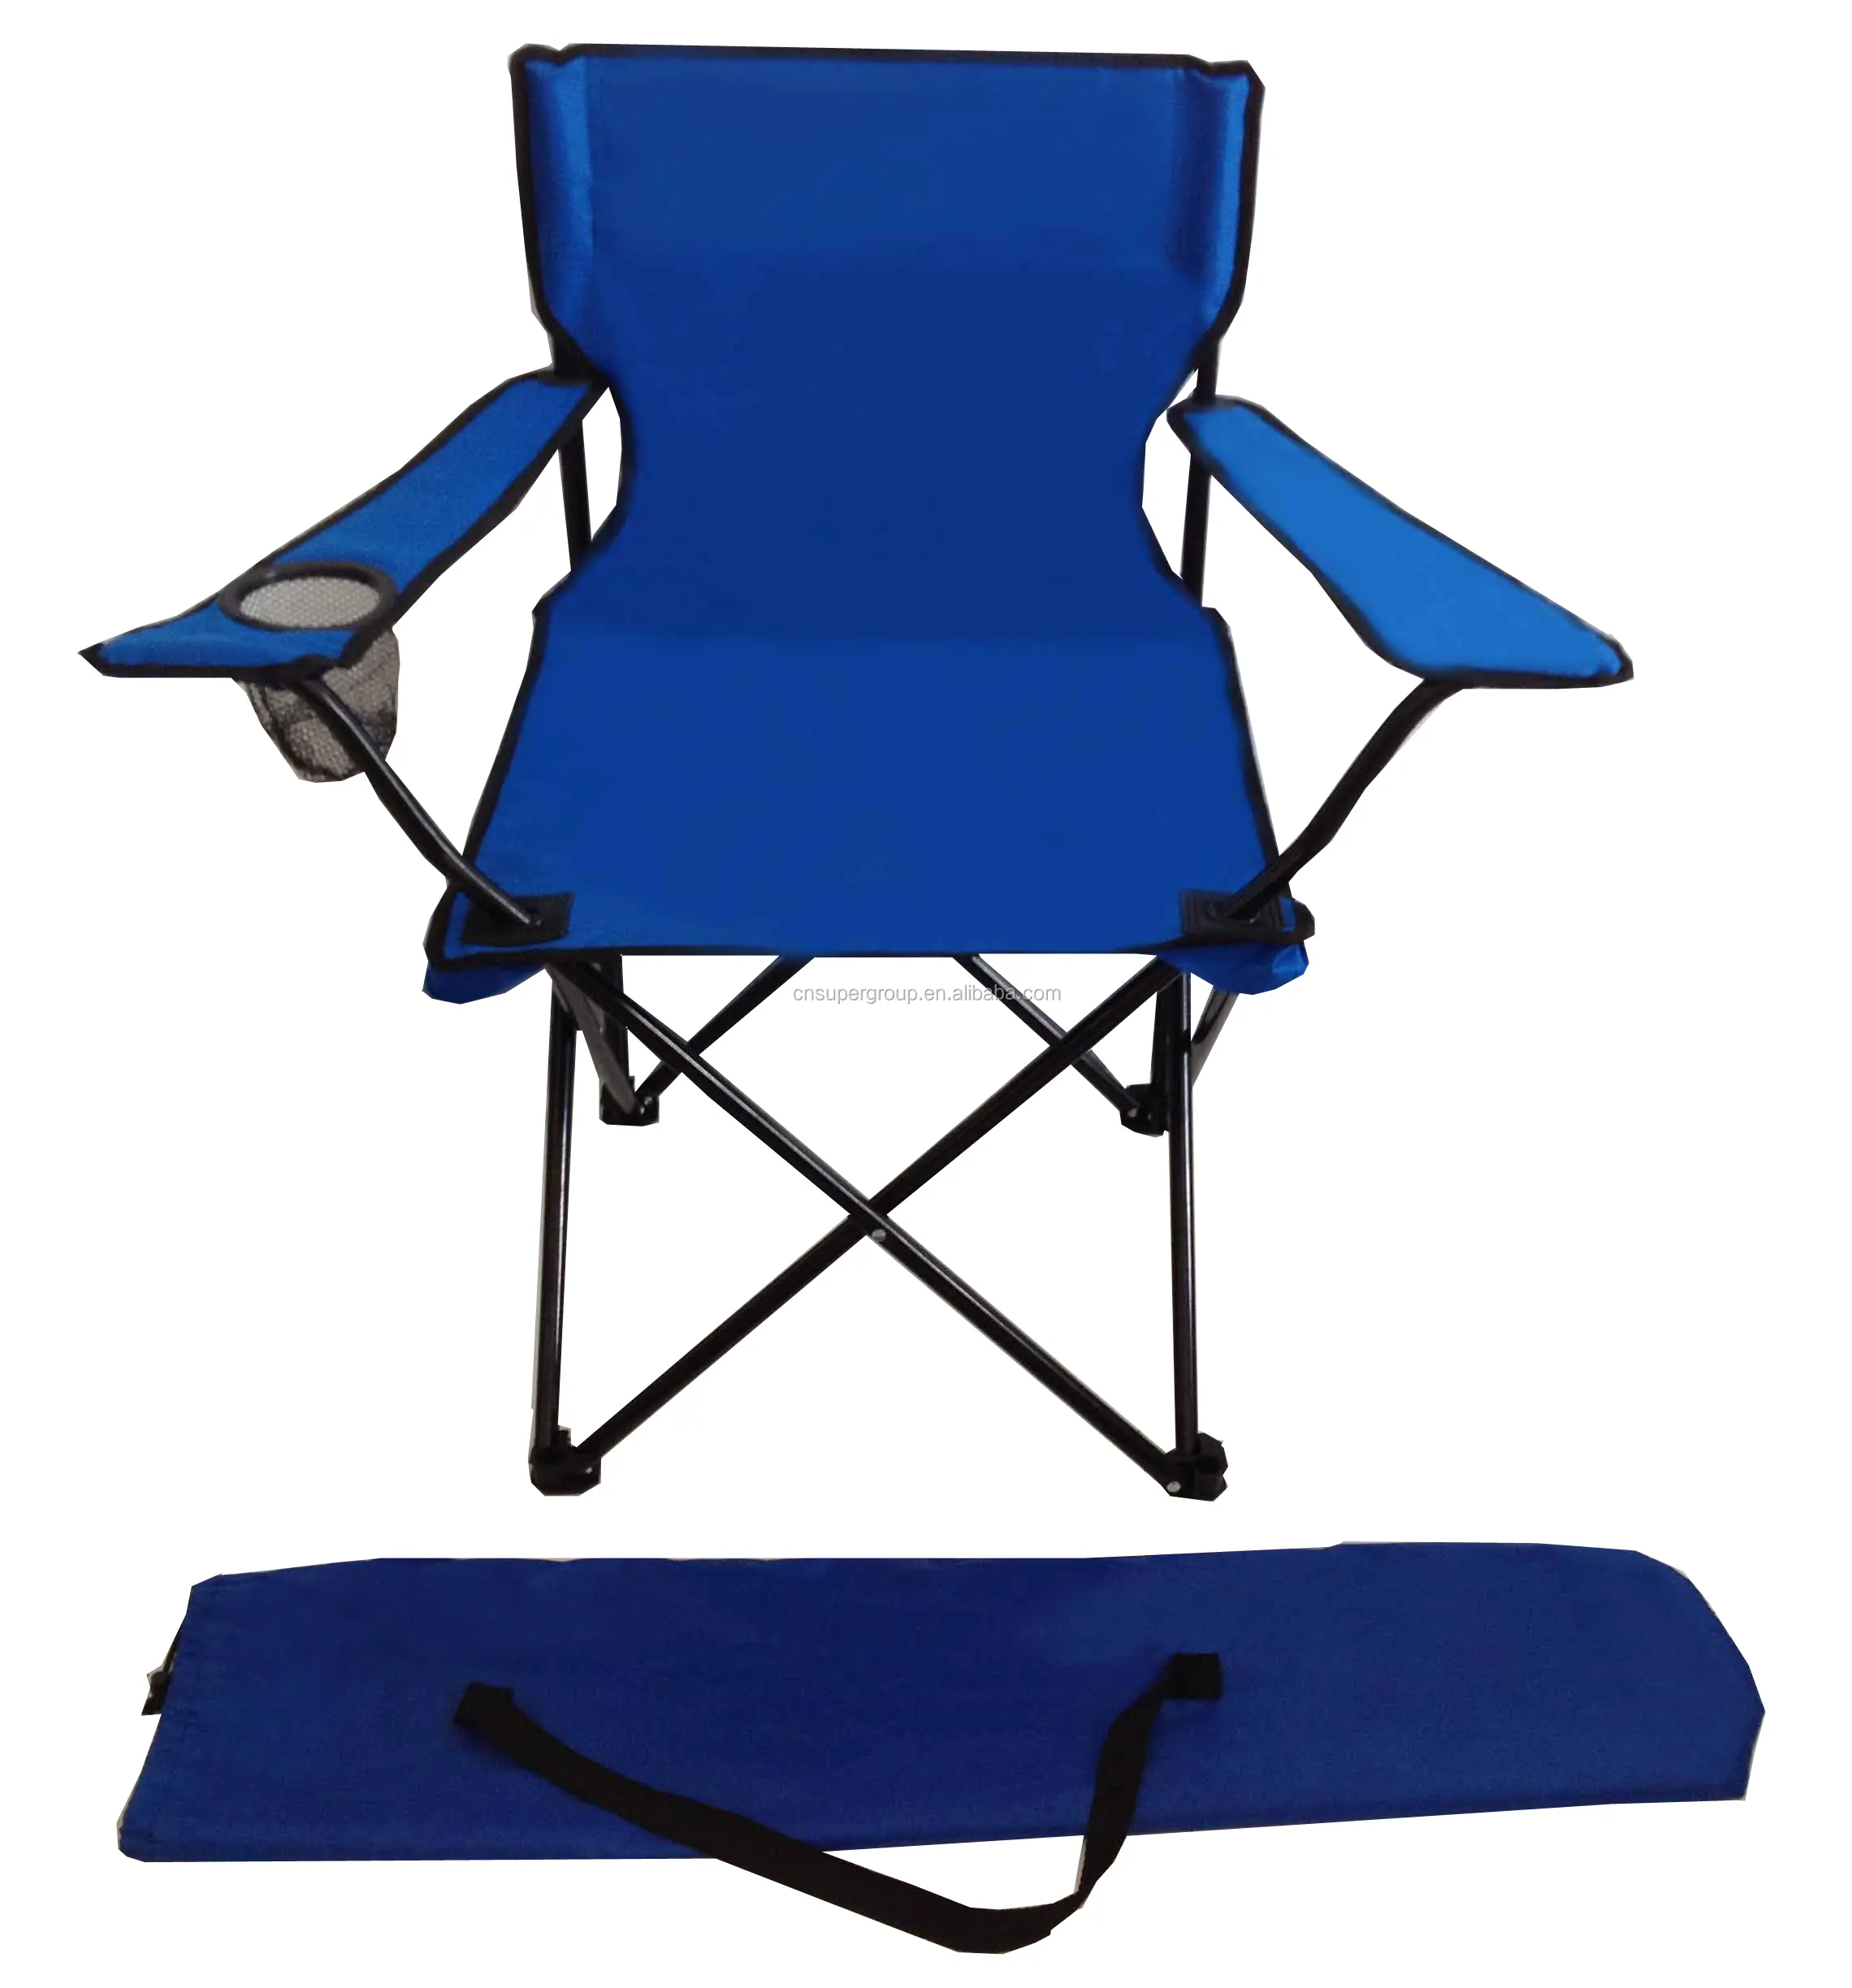 Best giant big Large oversize folding Giant Camping Chair relax chair 150kgs